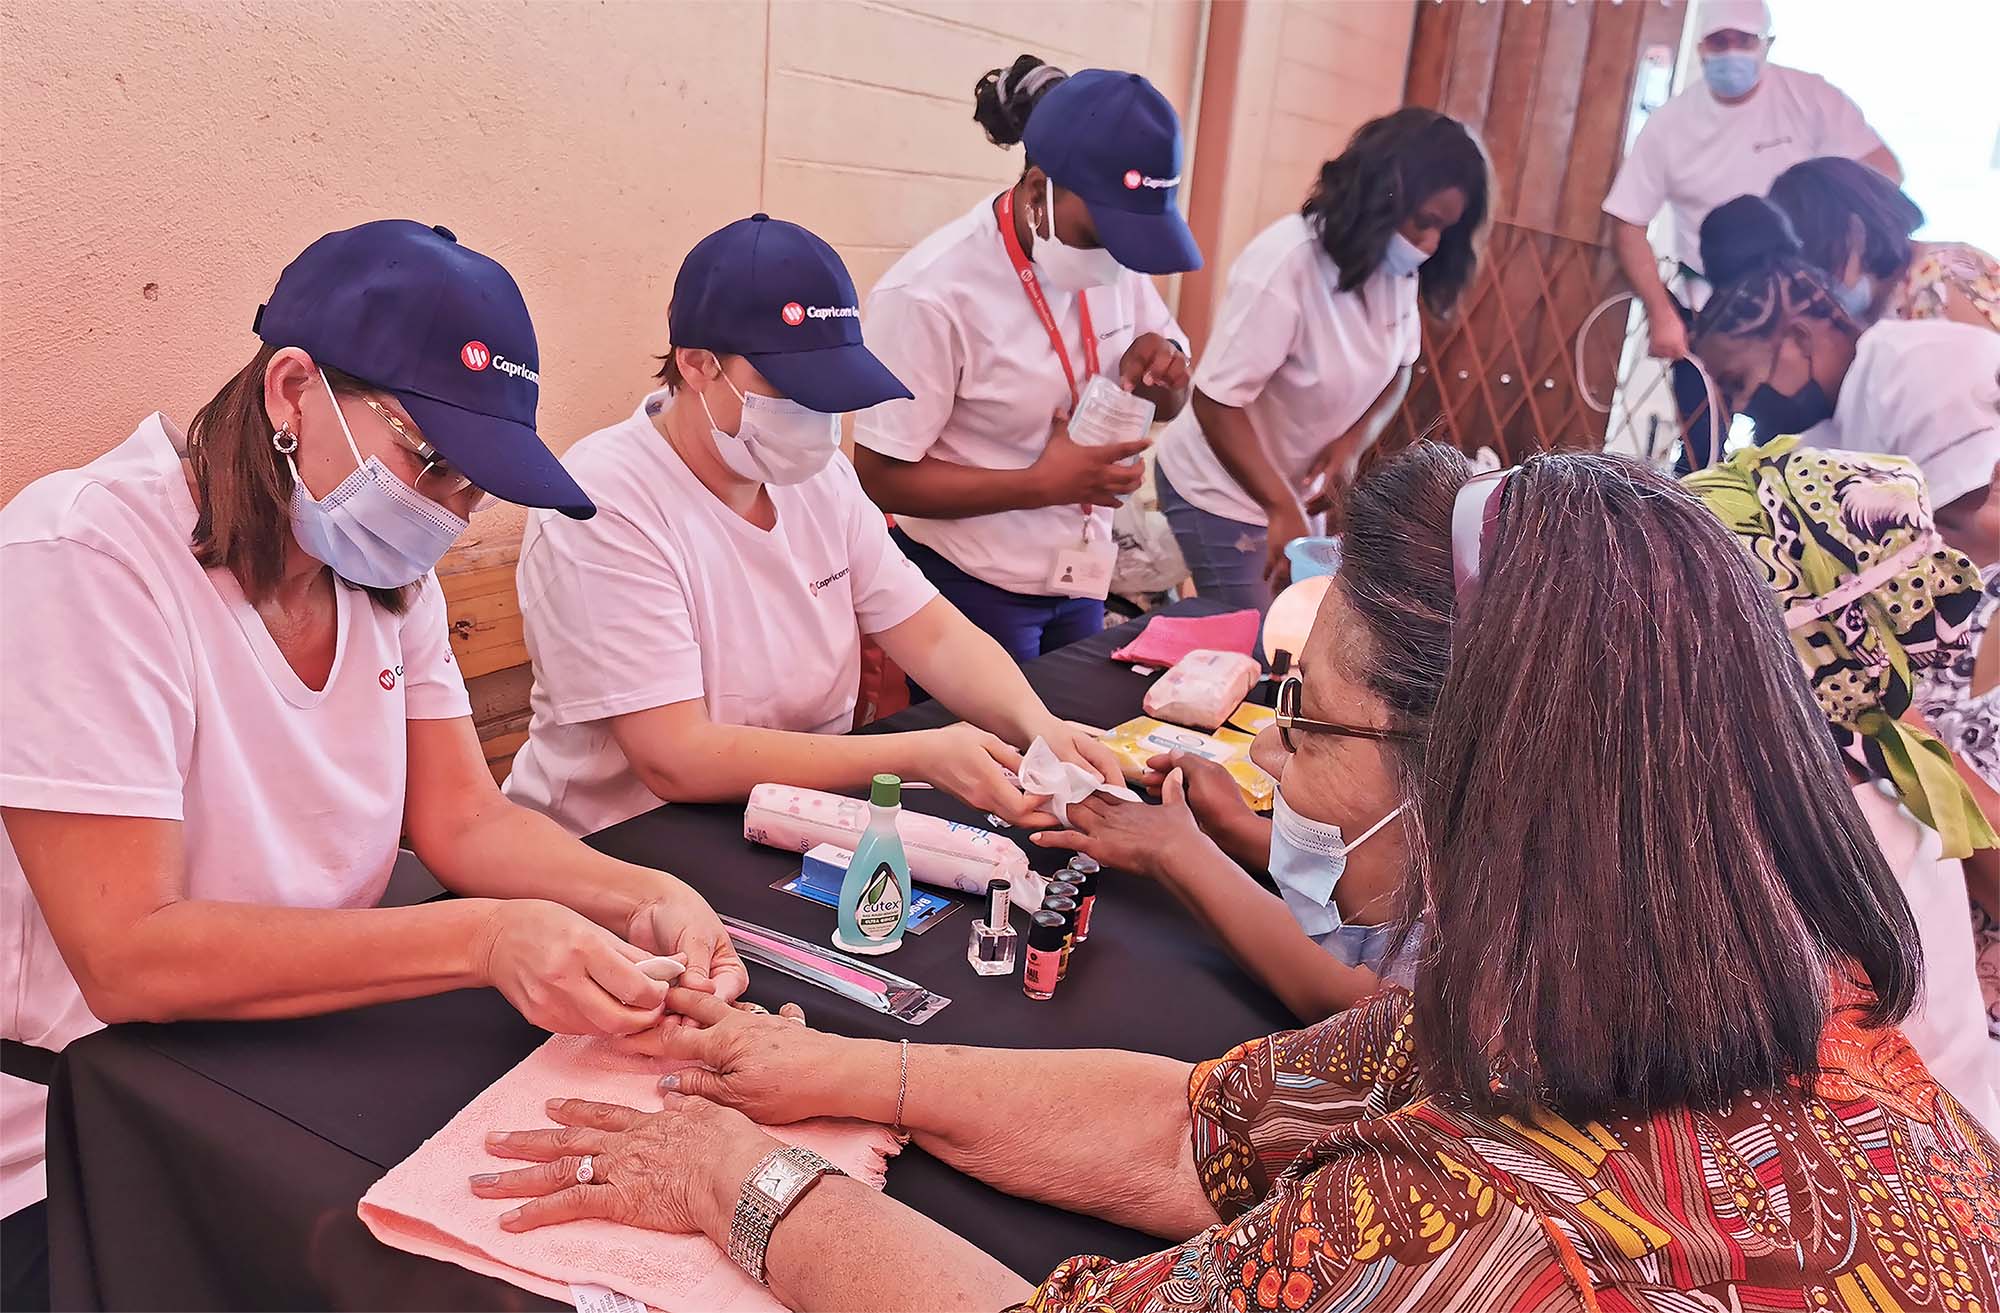 ChangeMakers giving manicures to the elderly